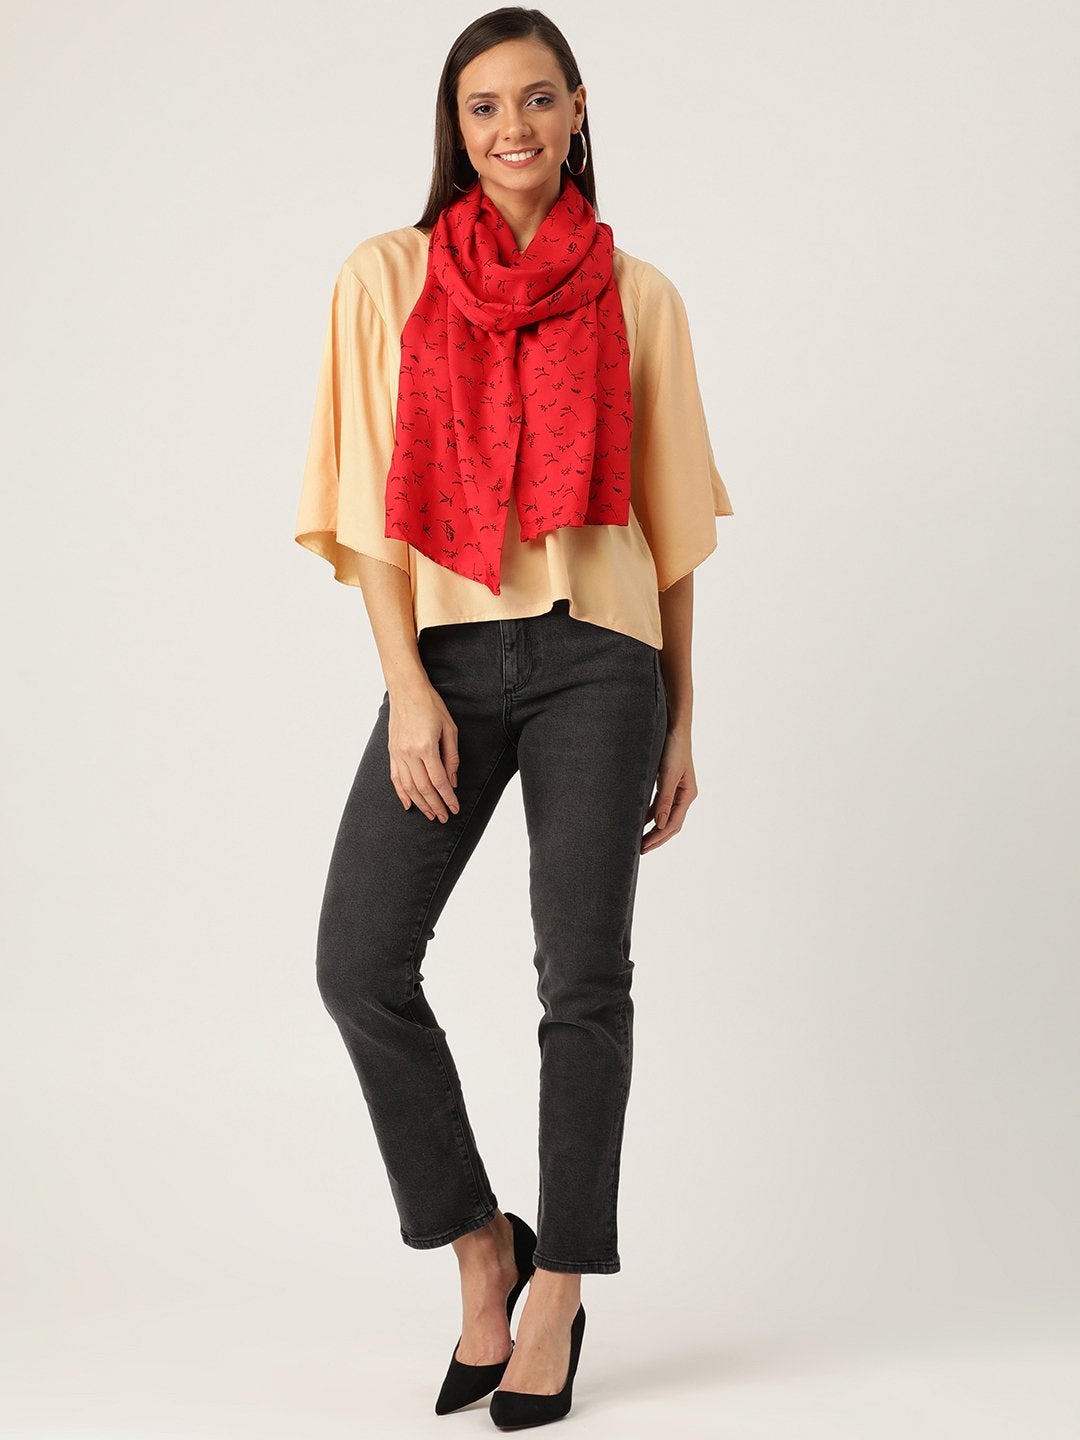 Women's Beige Top With Red Stole - InWeave